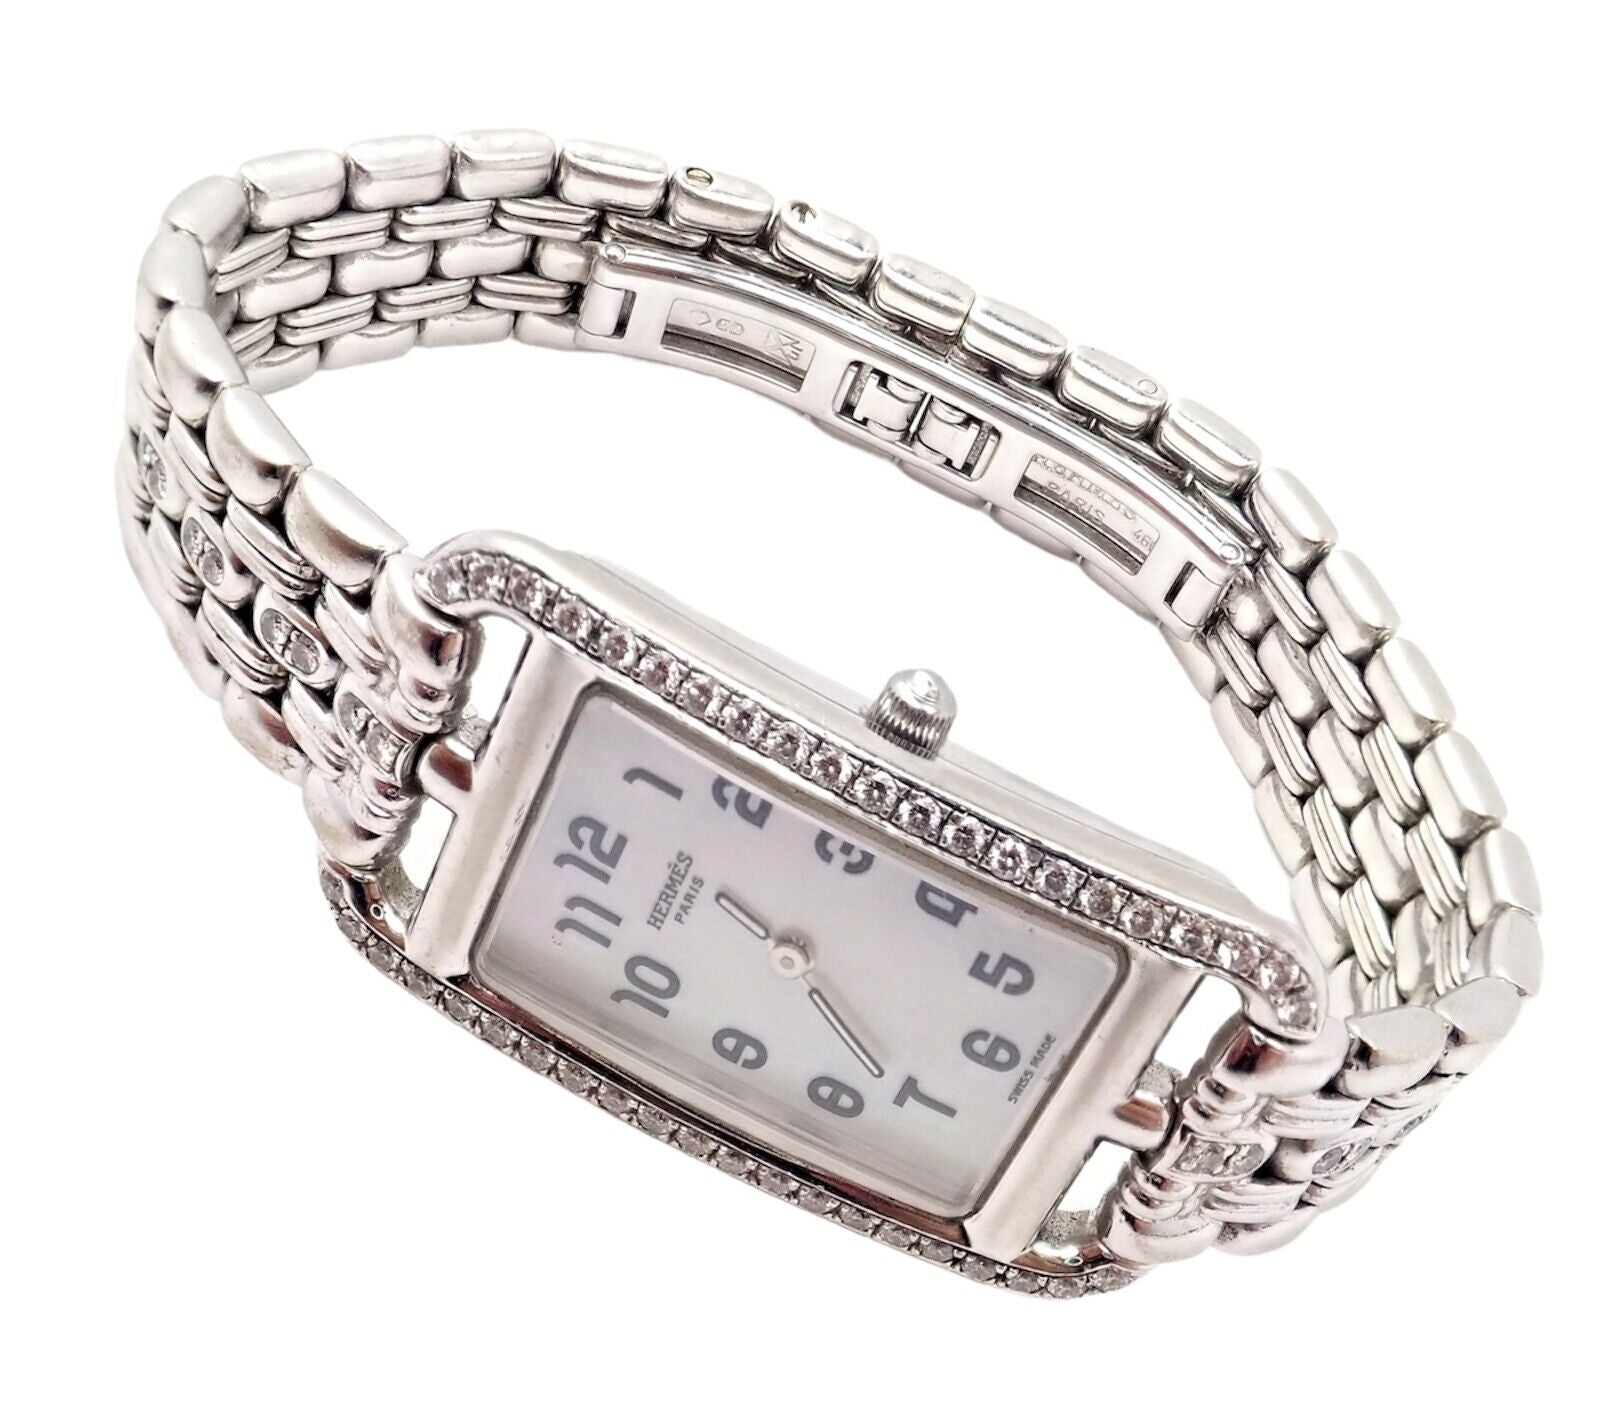 Hermes Jewelry & Watches:Watches, Parts & Accessories:Watches:Wristwatches Authentic! Hermes 18k White Gold Diamond Cape Cod Nantucket Ladies Watch NA1.292